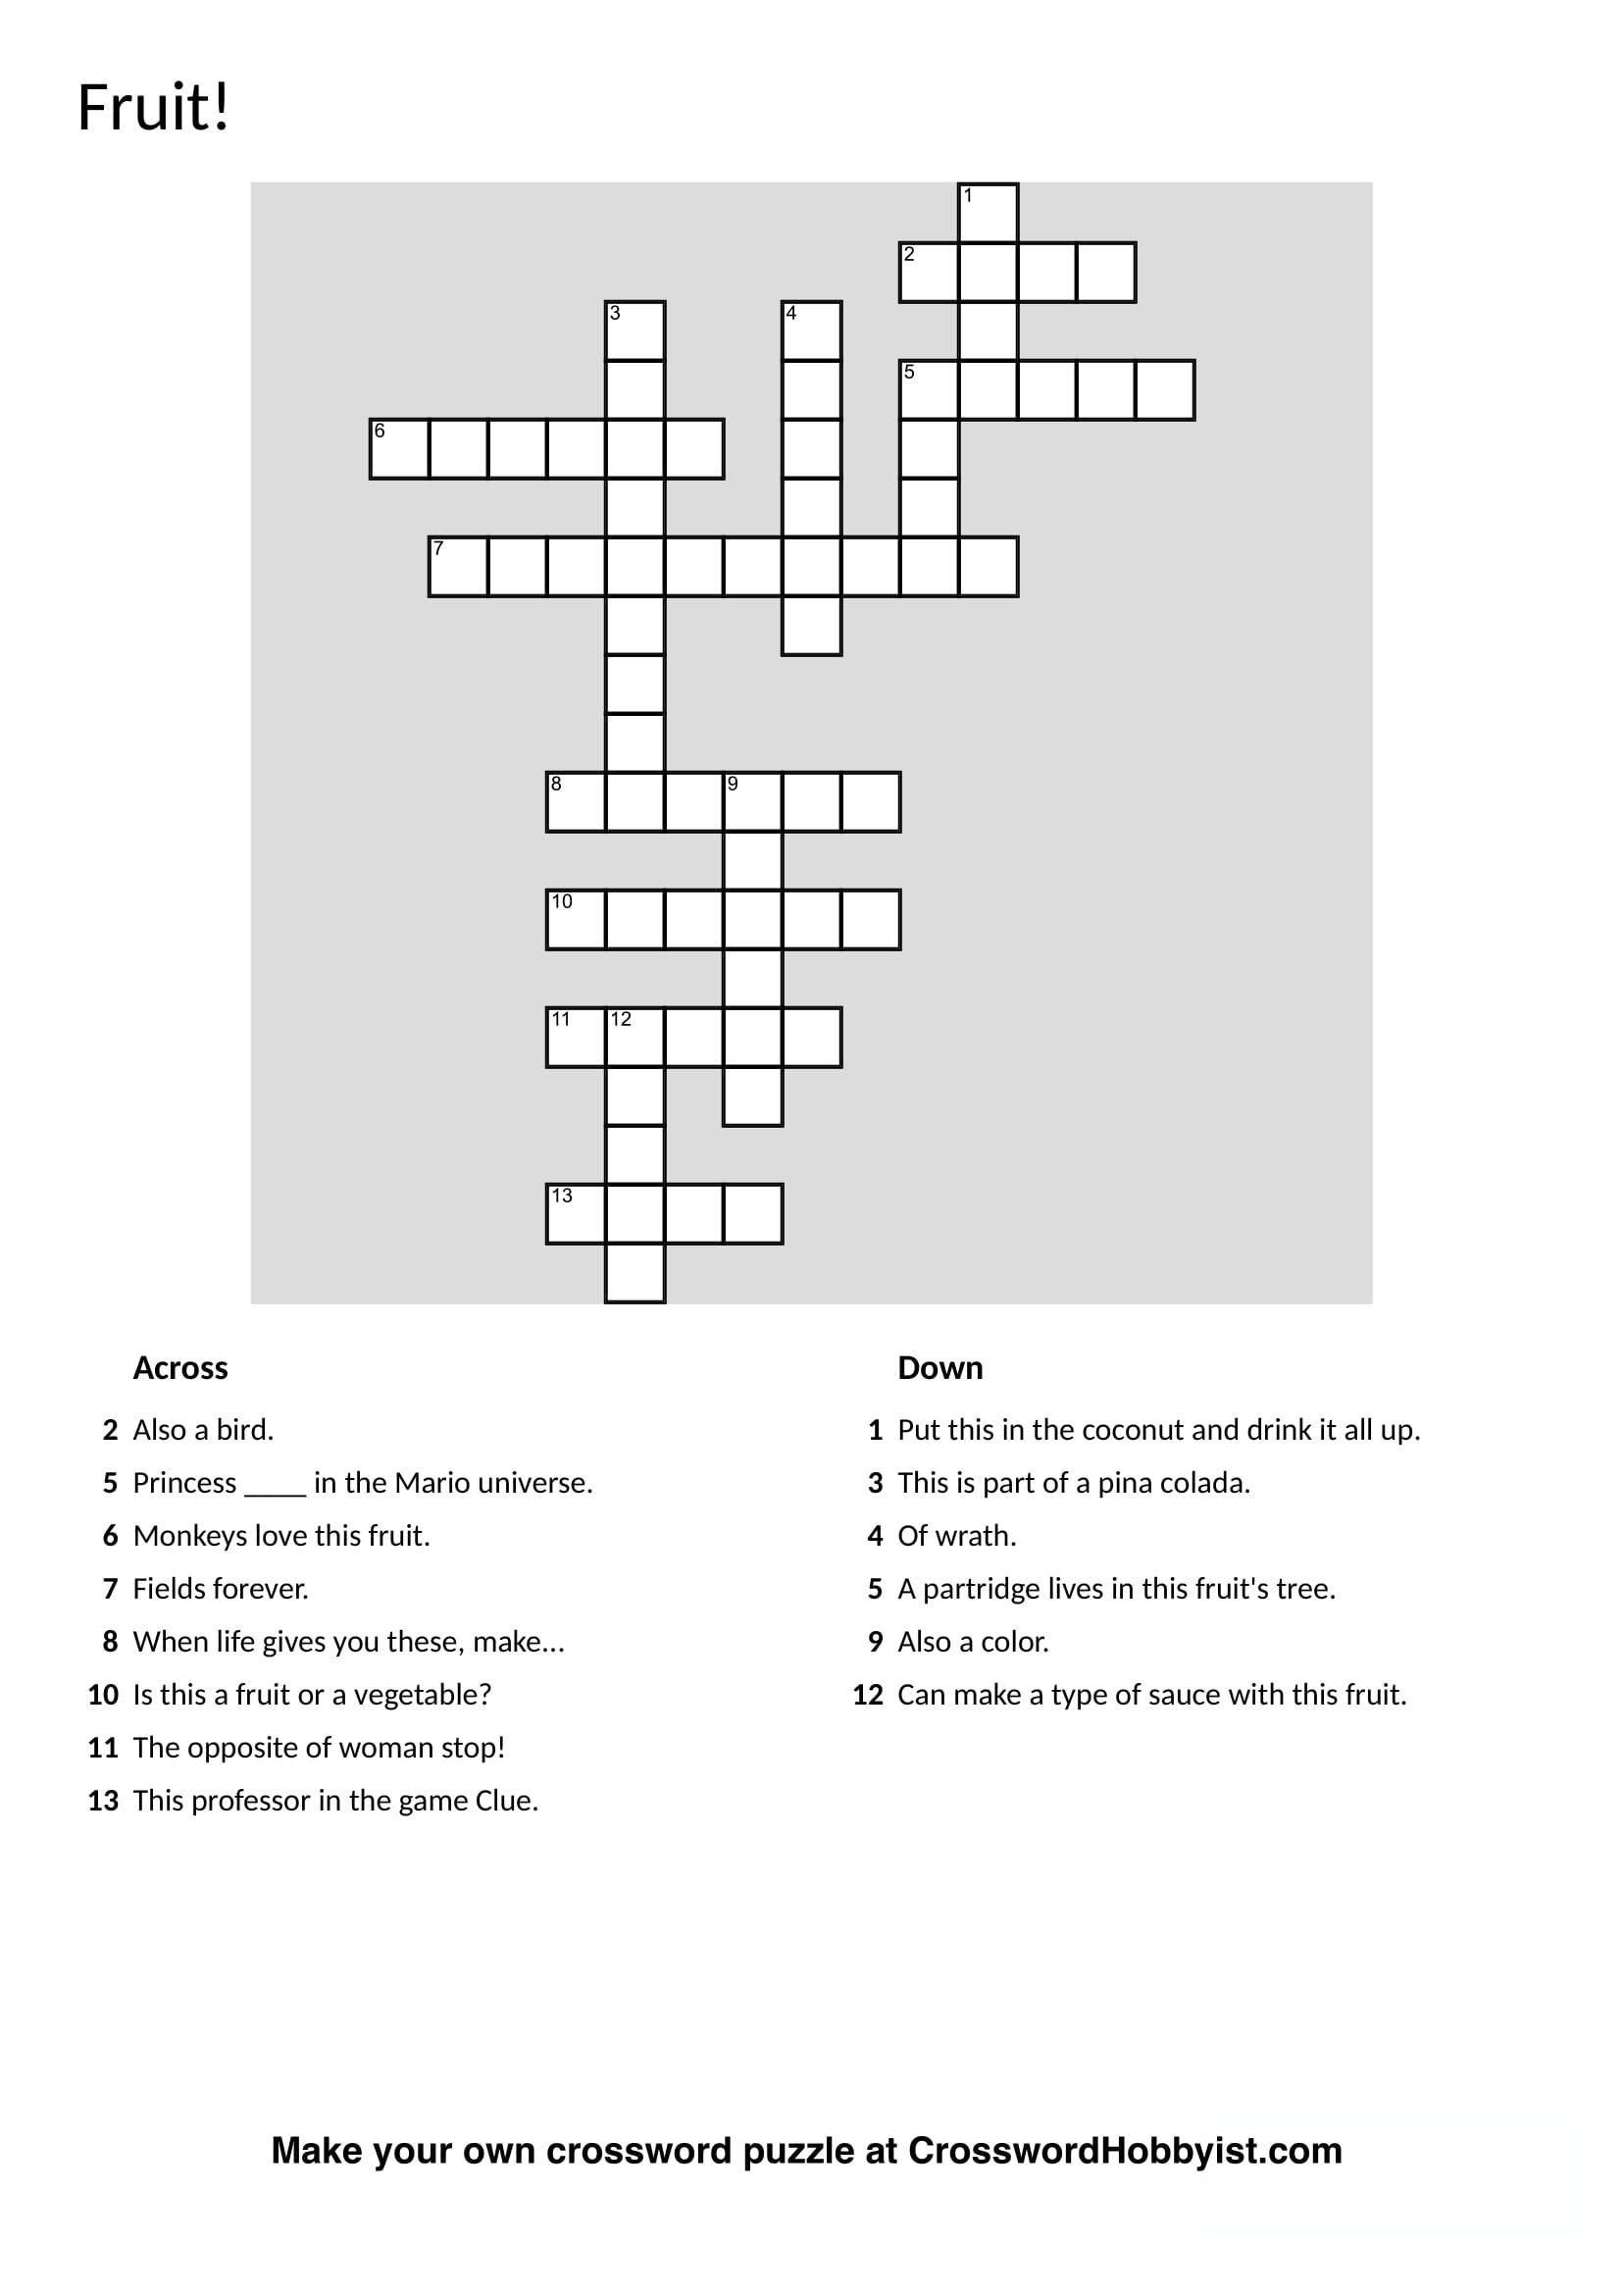 Make Your Own Crossword Puzzle Free Printable | Free ...